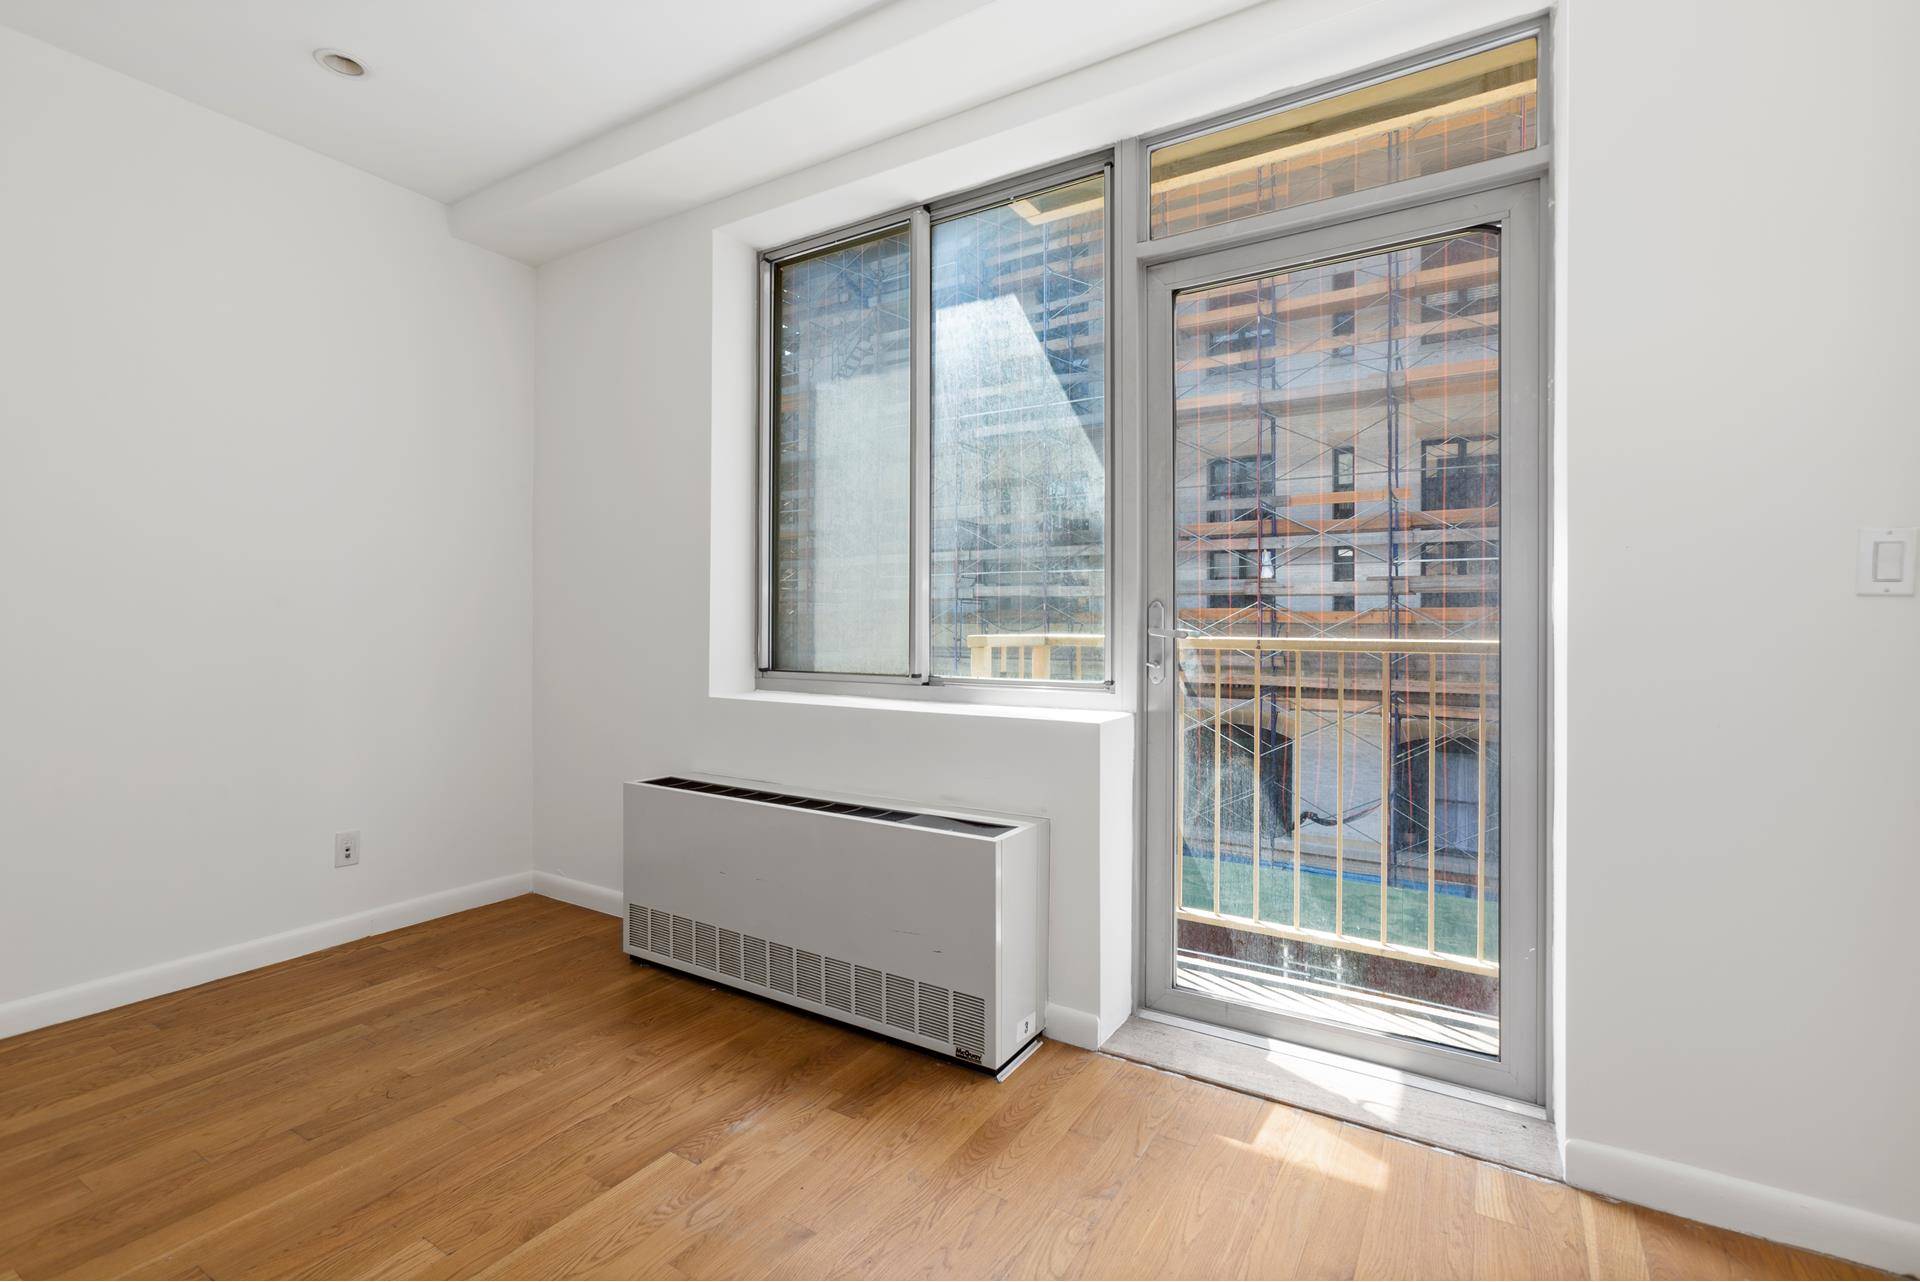 Large, south facing converted 4 bedroom, 2 bathroom home with private balcony in 159 Bleecker Street, a full service building of 20 residences with part time doorman, elevator, laundry, fitness ...